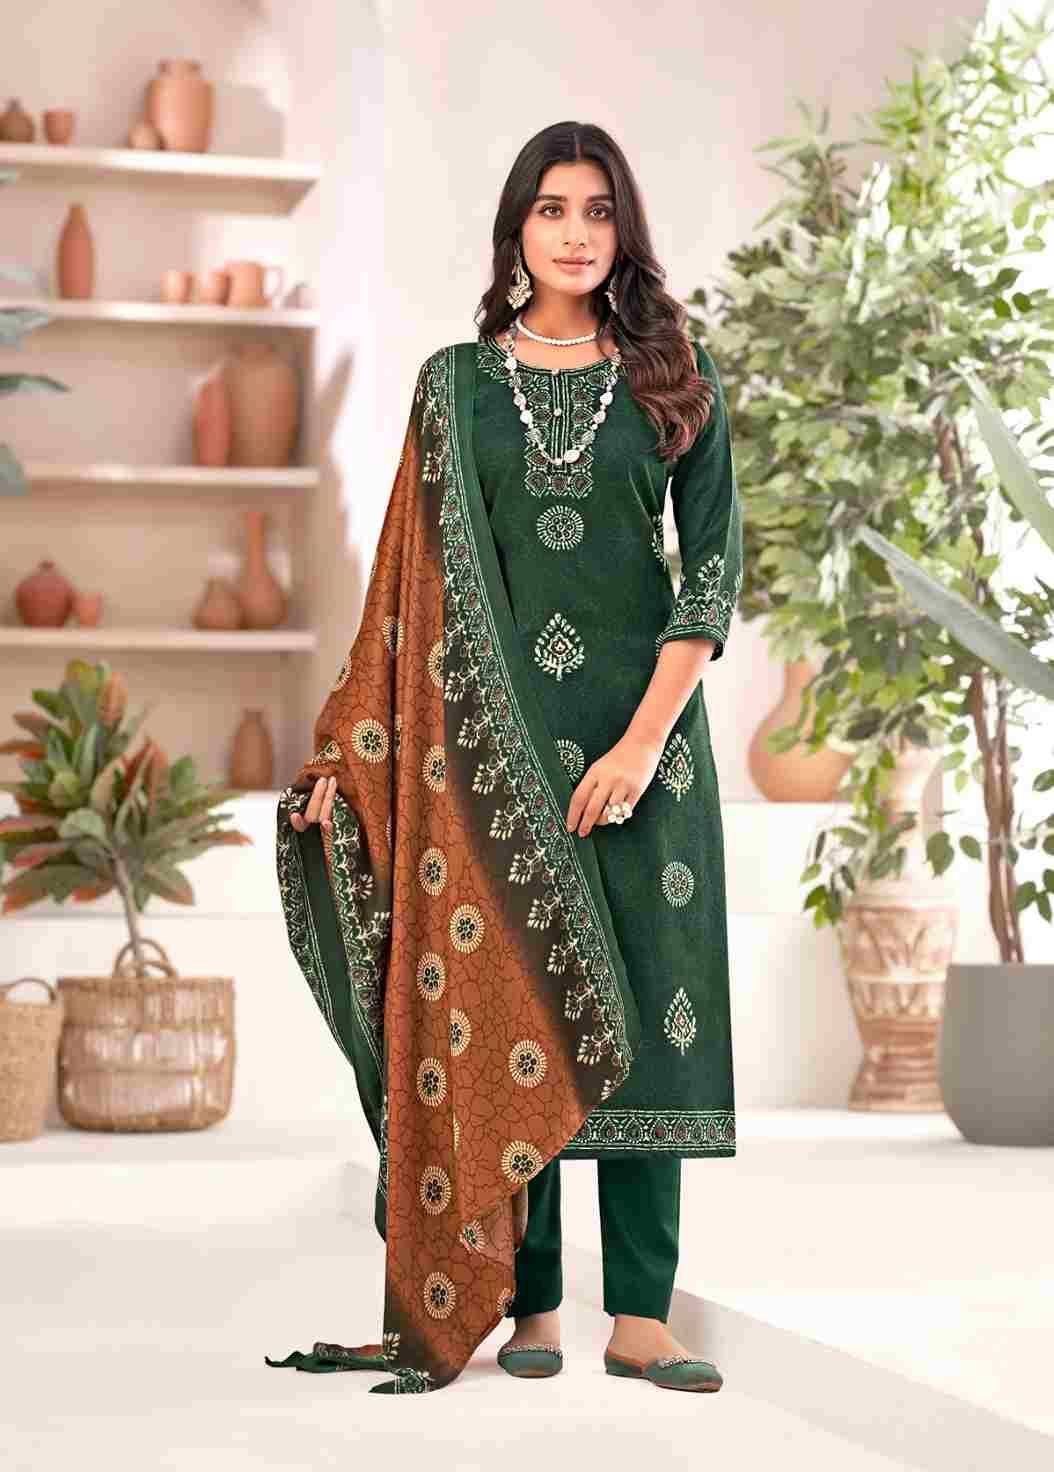 Sadhna By Skt Suits 83001 To 83008 Series Beautiful Festive Suits Stylish Fancy Colorful Casual Wear & Ethnic Wear Pashmina Print Dresses At Wholesale Price